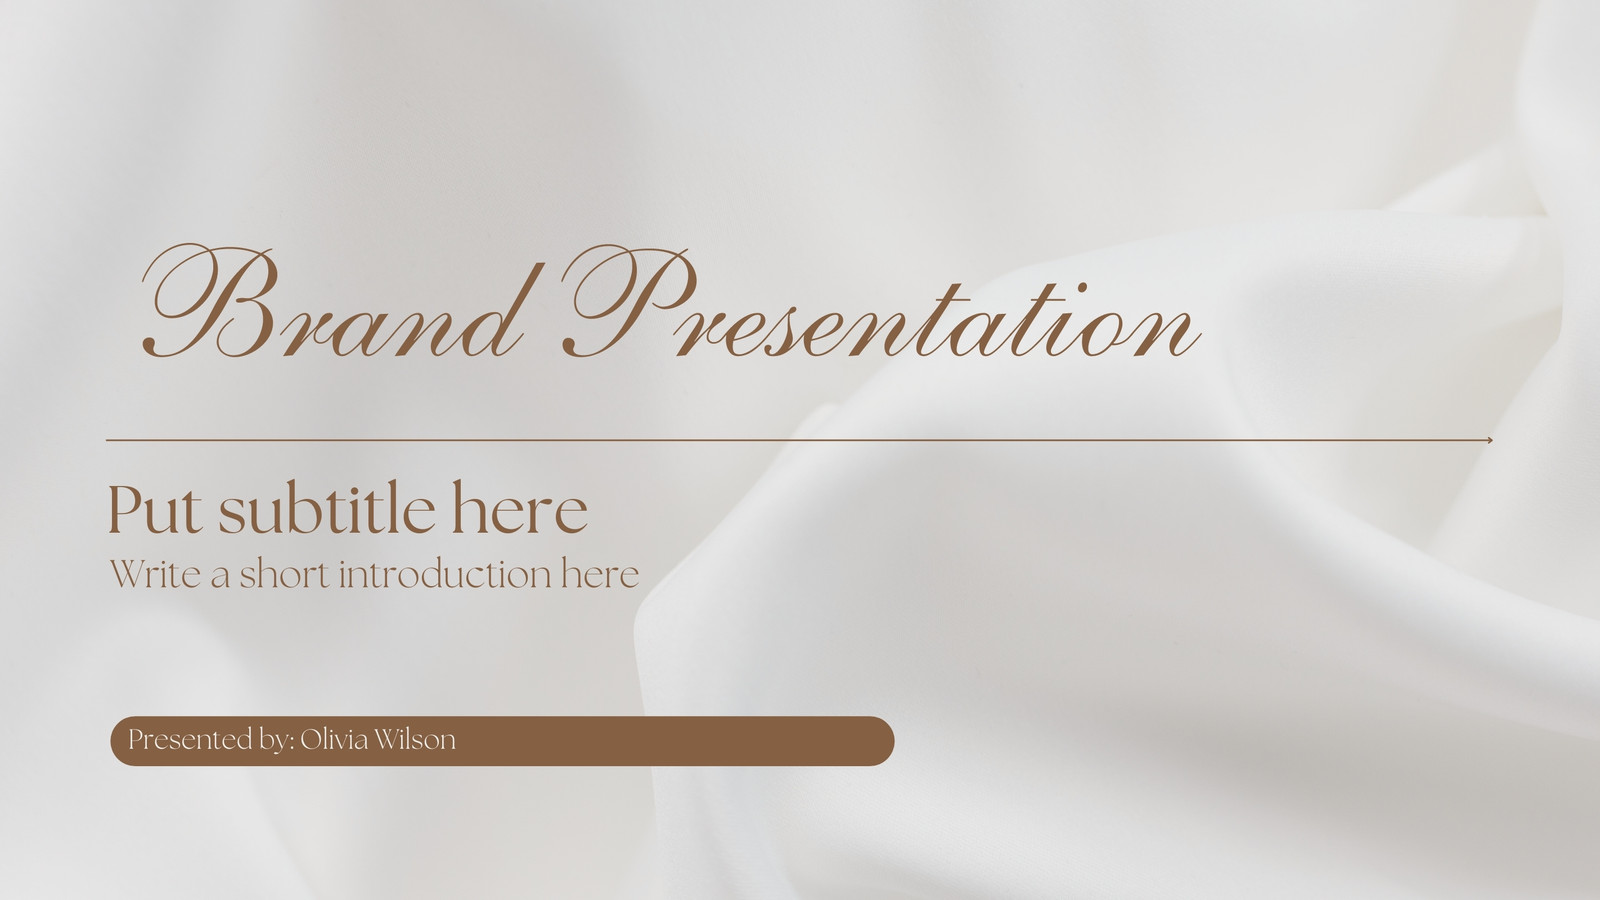 fashion backgrounds for powerpoint